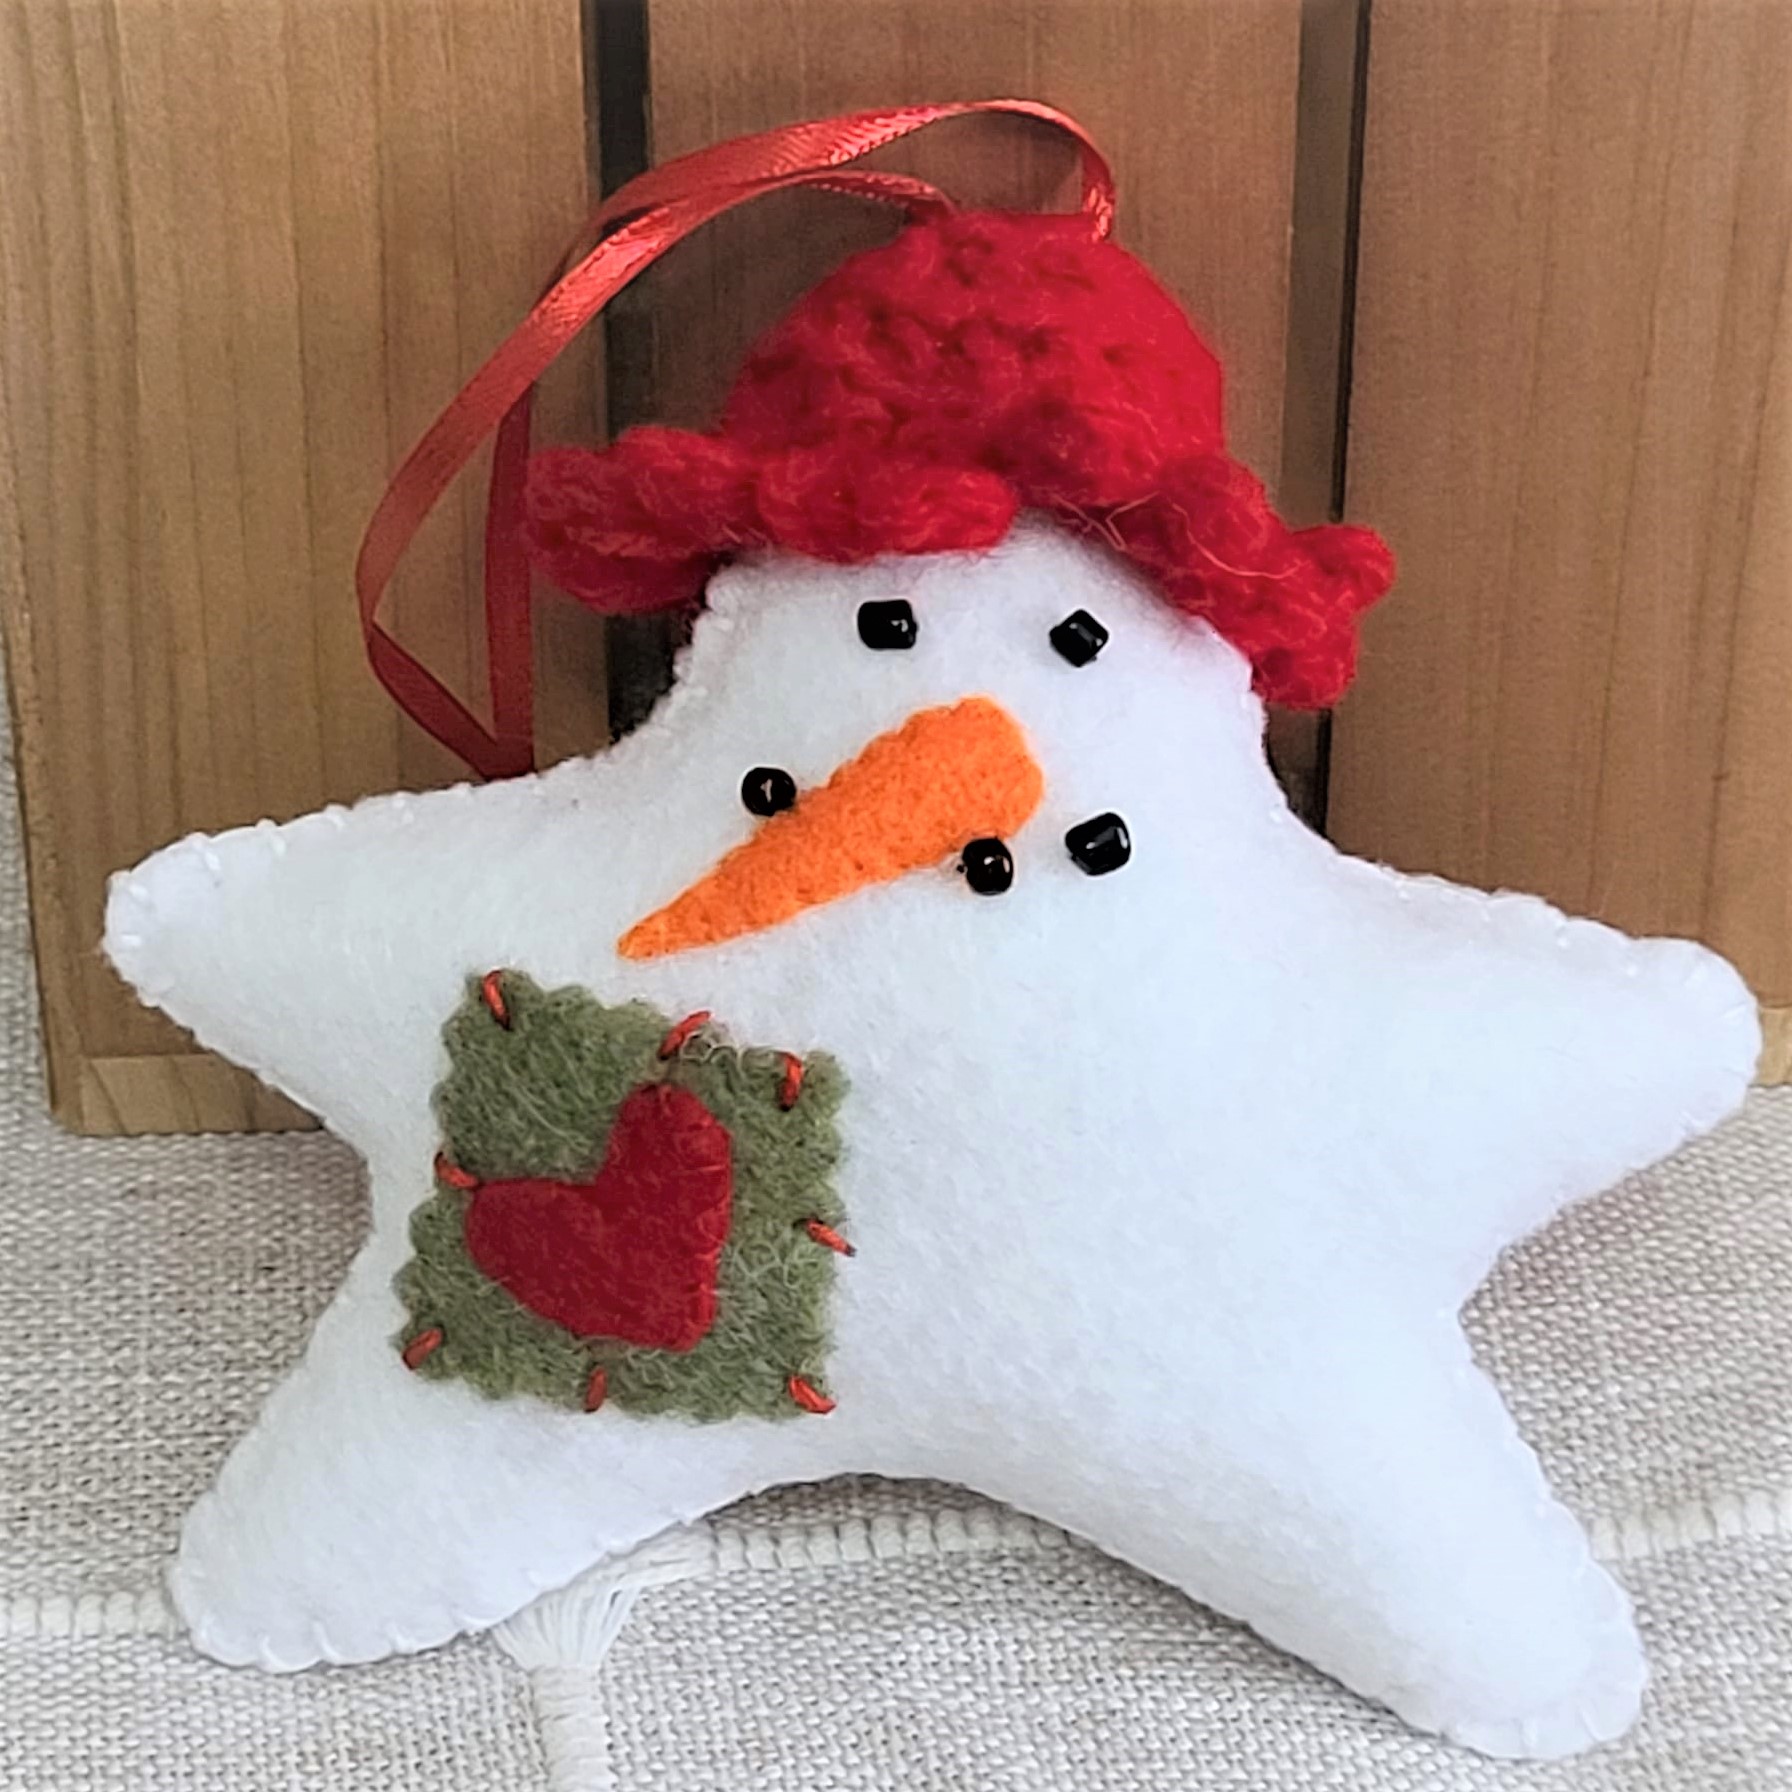 Felt Snowman star ornament with crochet hat - red hat - Click Image to Close